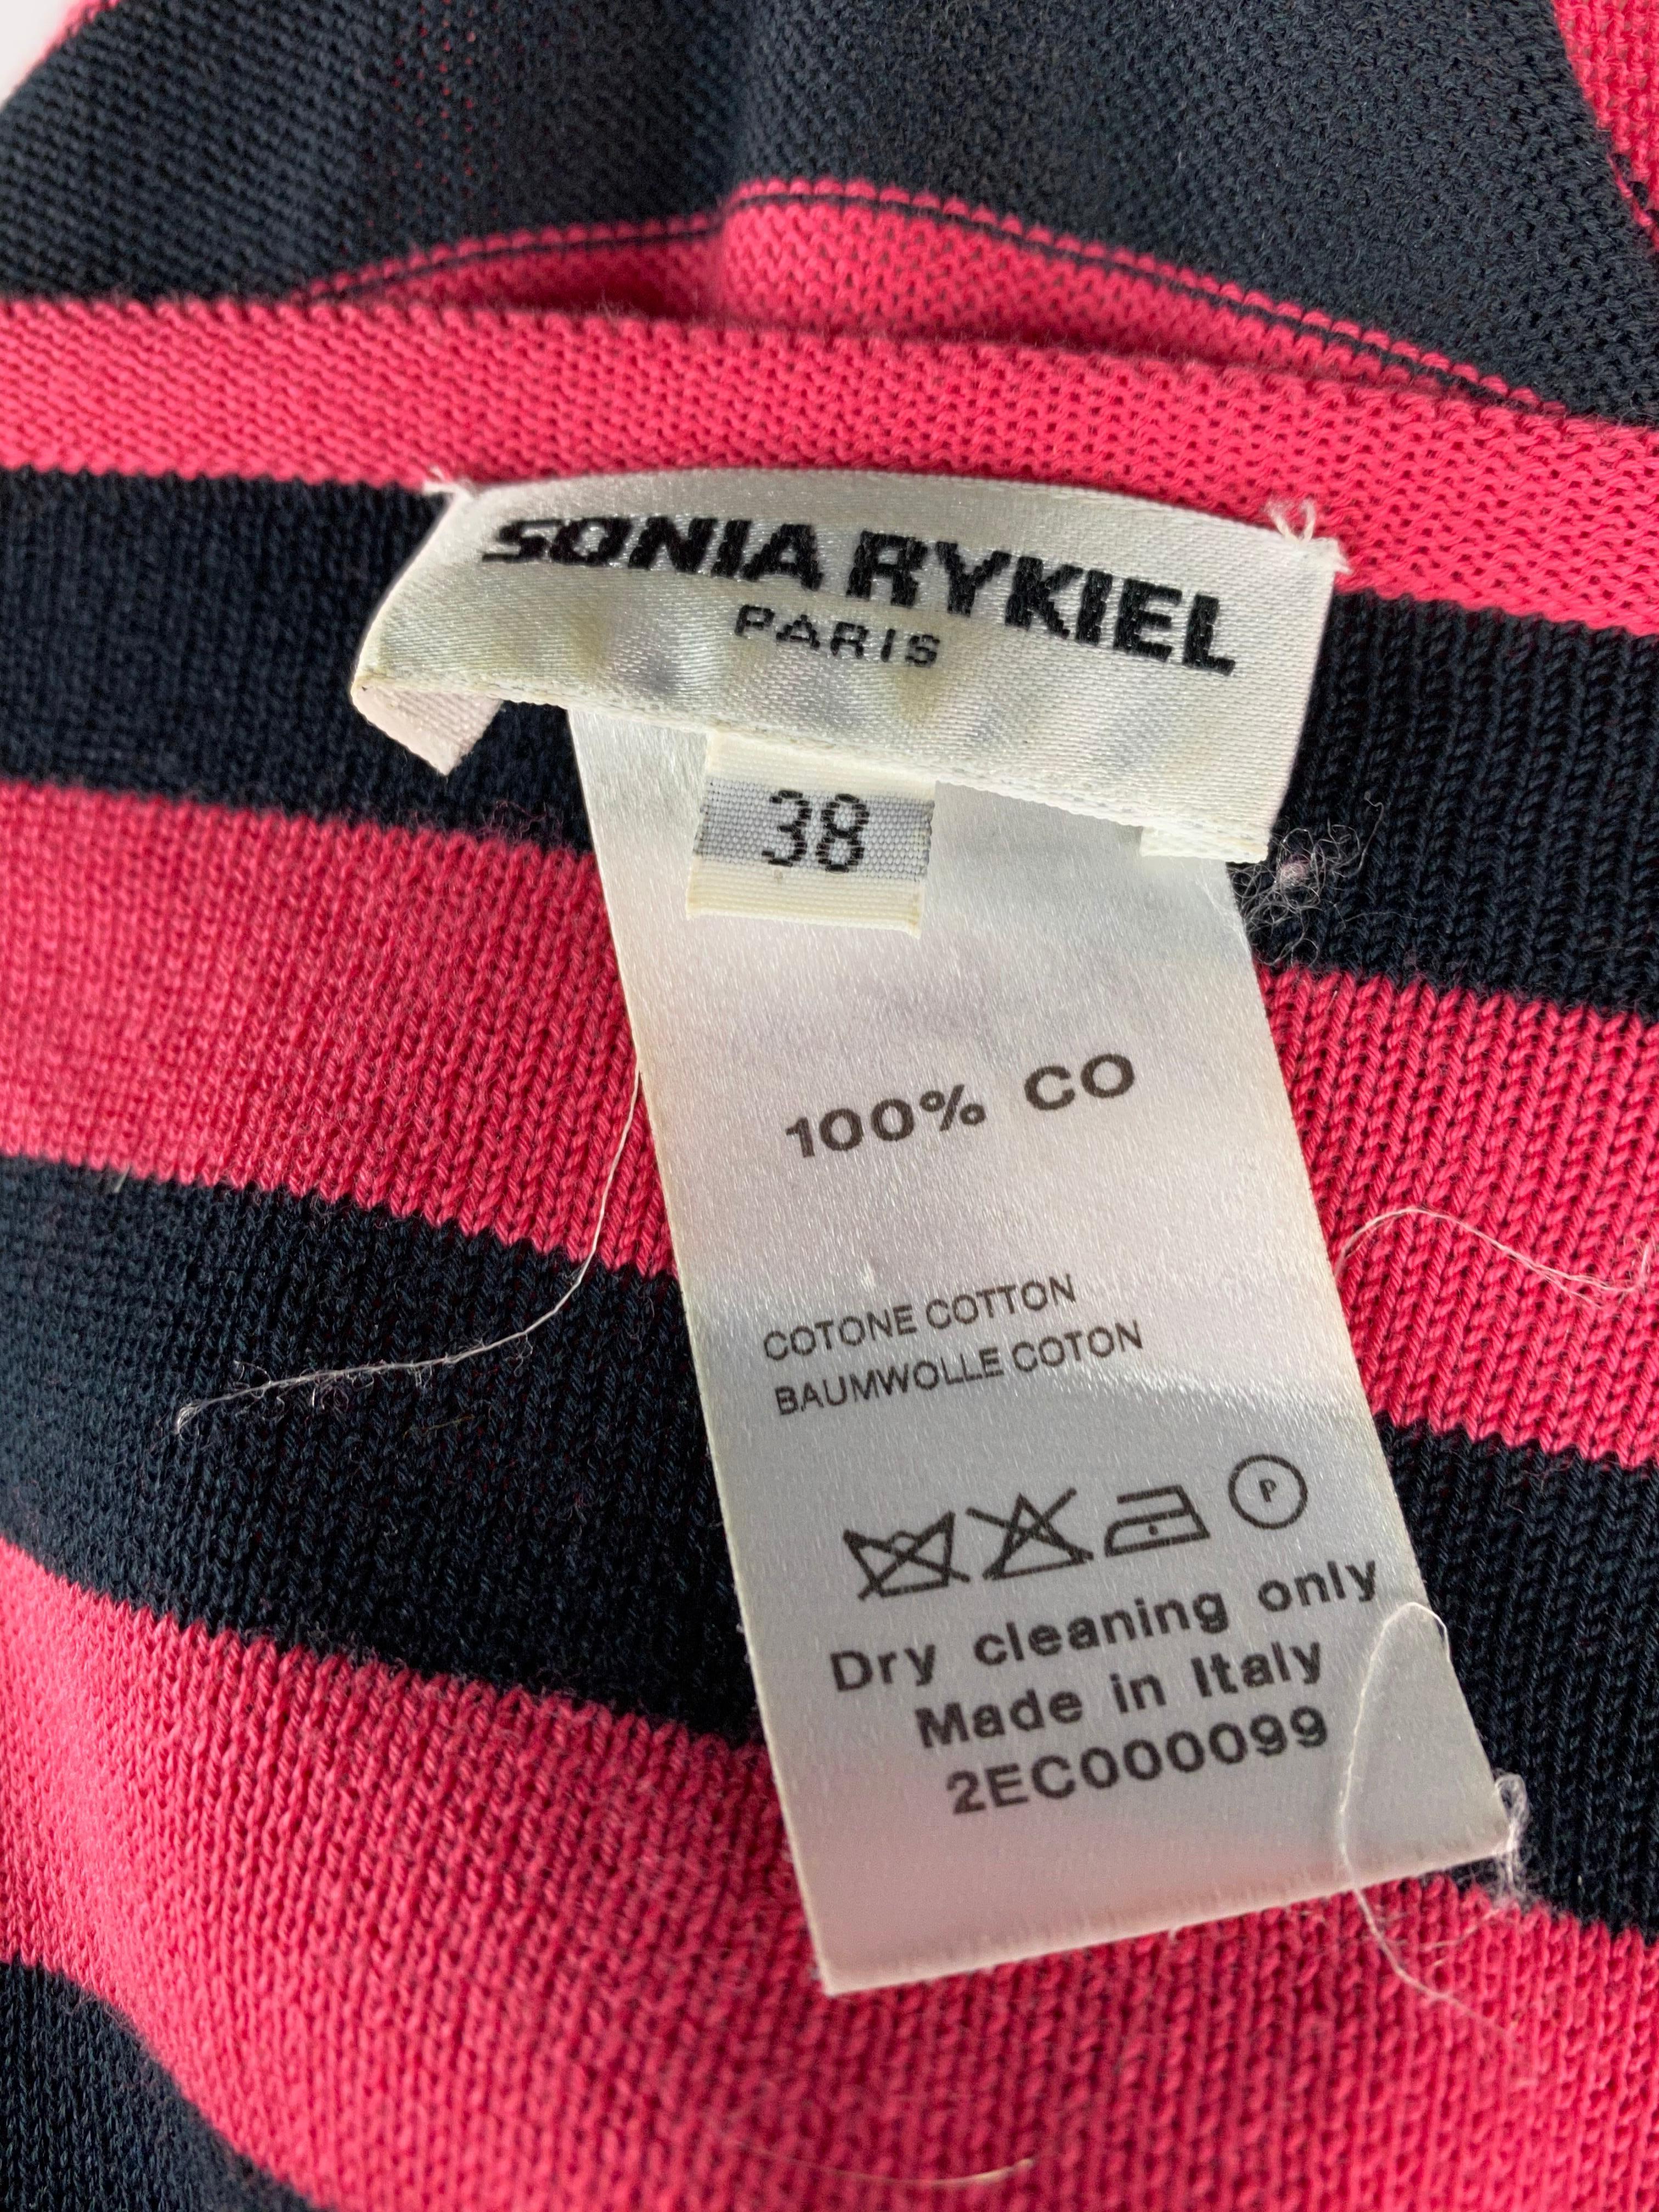 Sonia Rykiel Paris Pink and Navy Striped Maxi Dress w/ Flower Brooch Size 38 For Sale 9